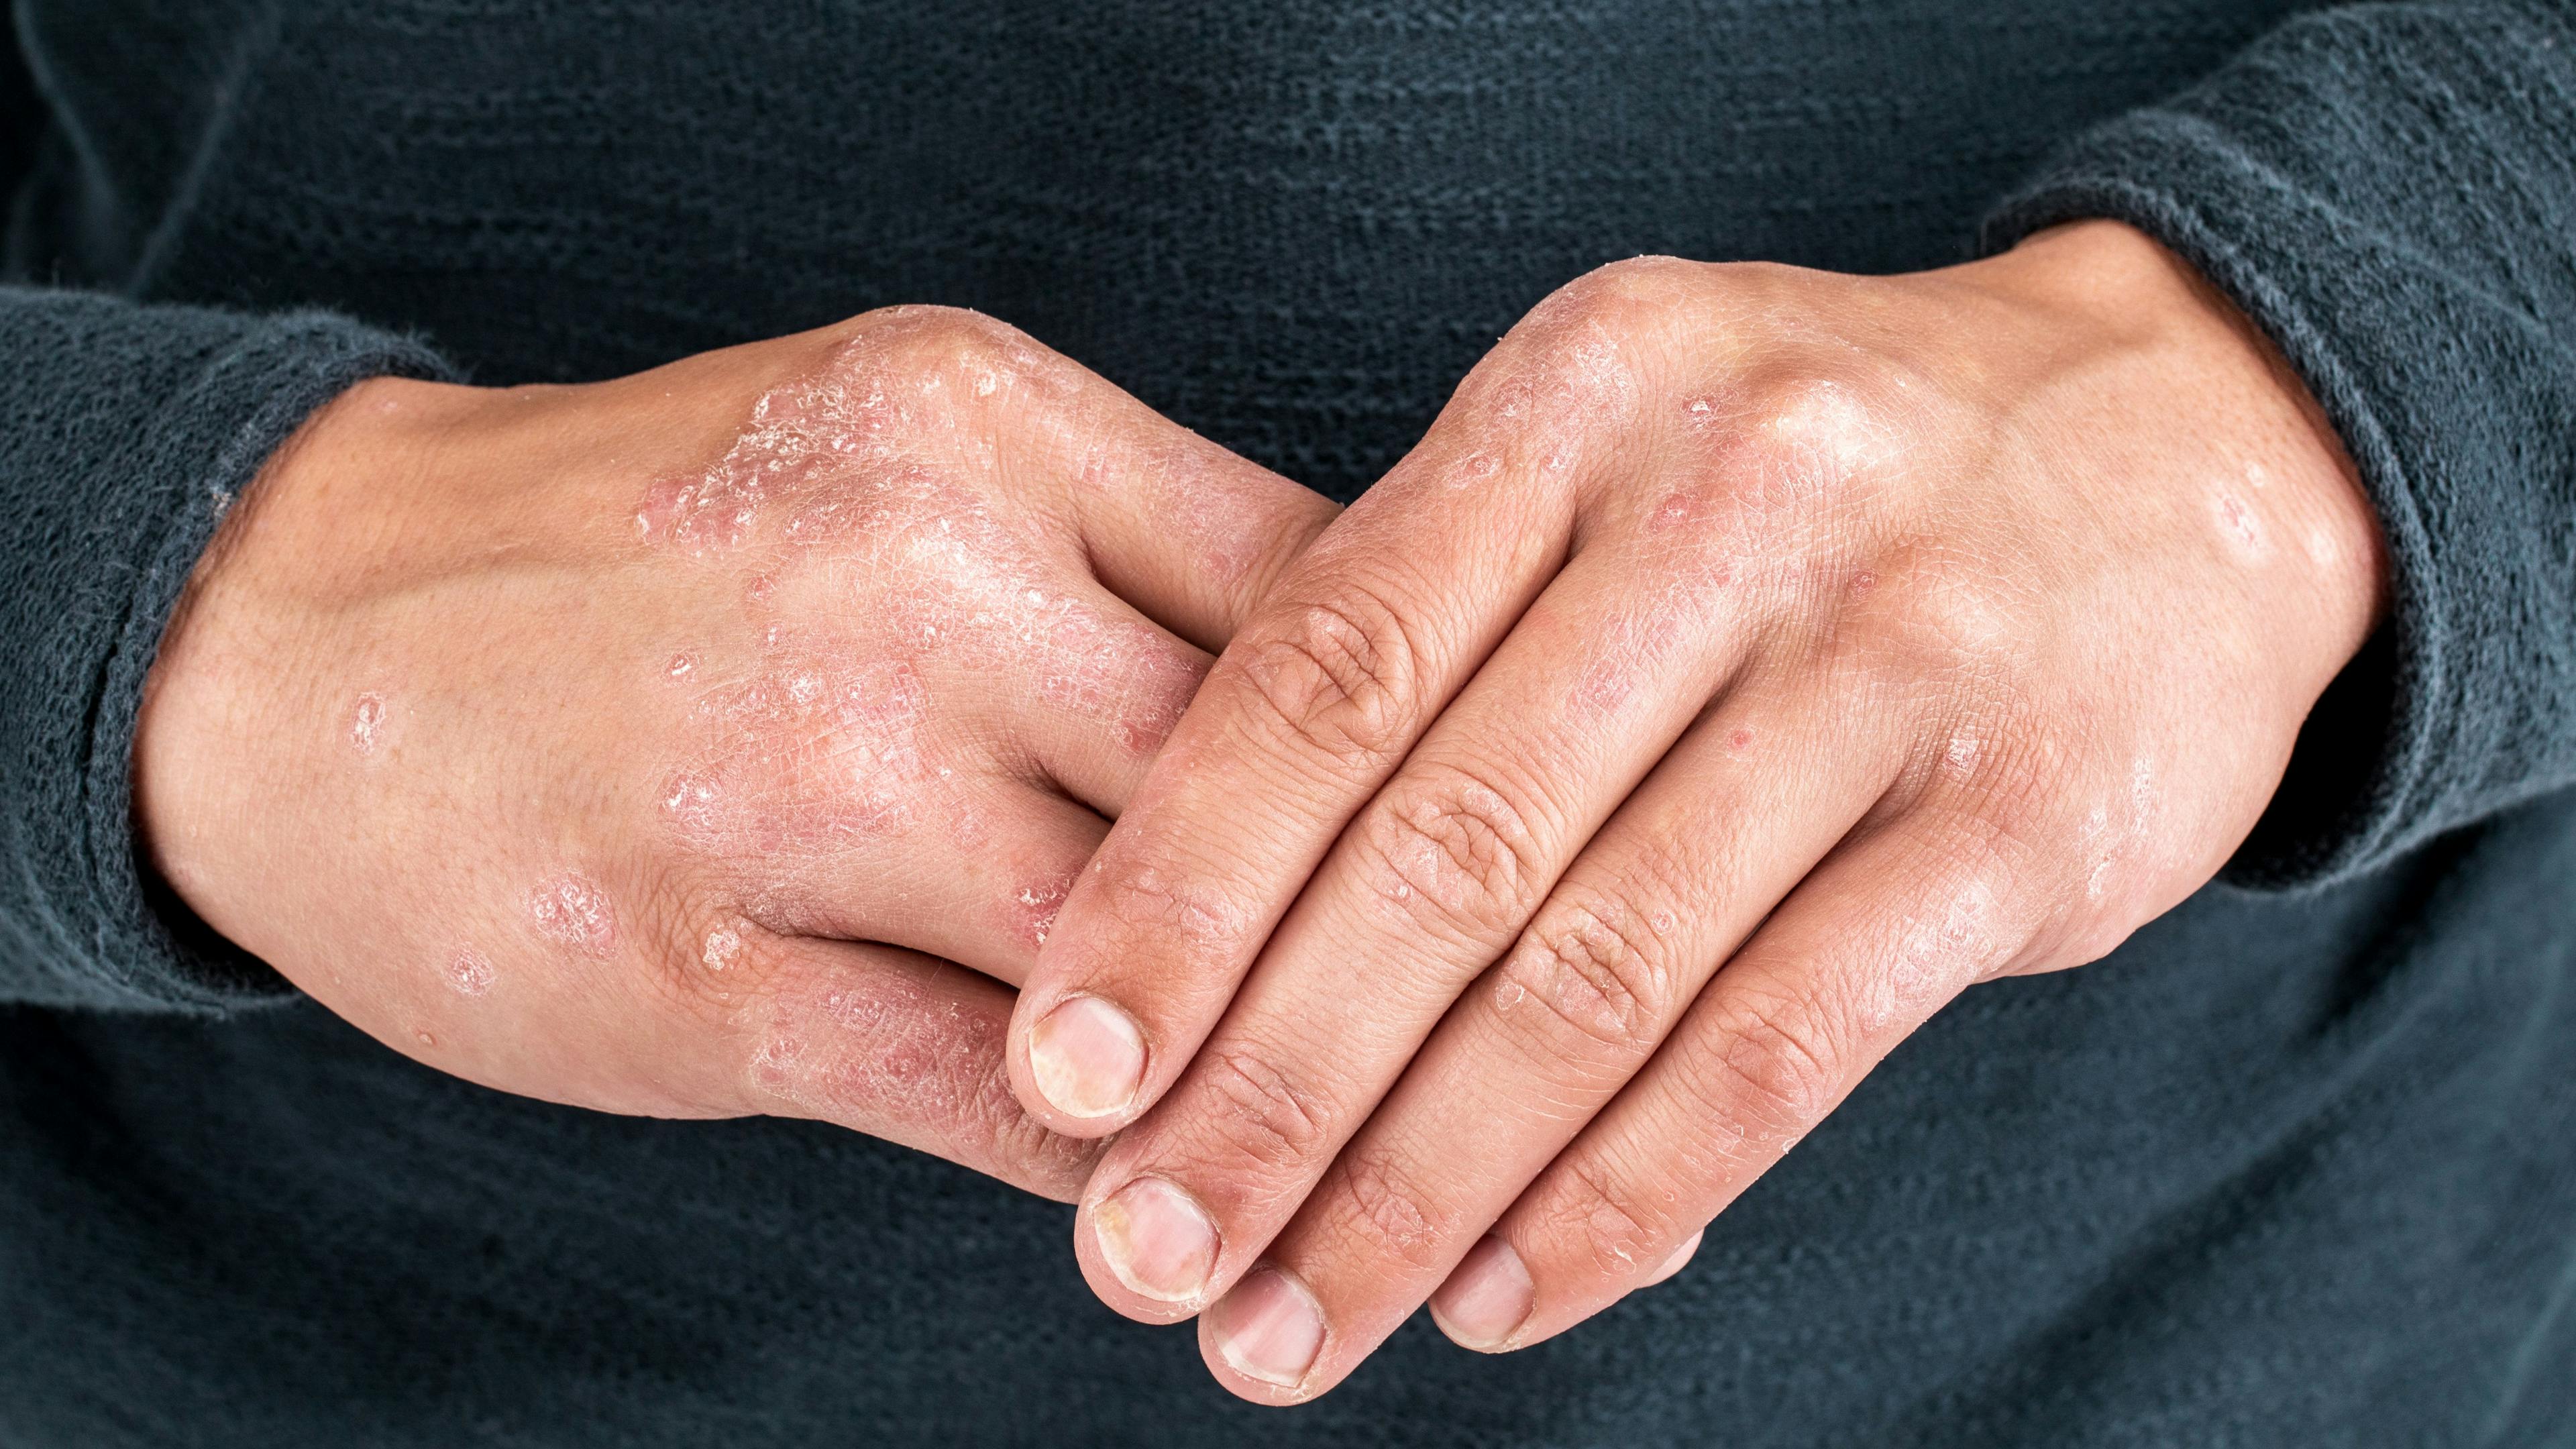 Soligenix Expands Synthetic Hypericin Psoriasis Study